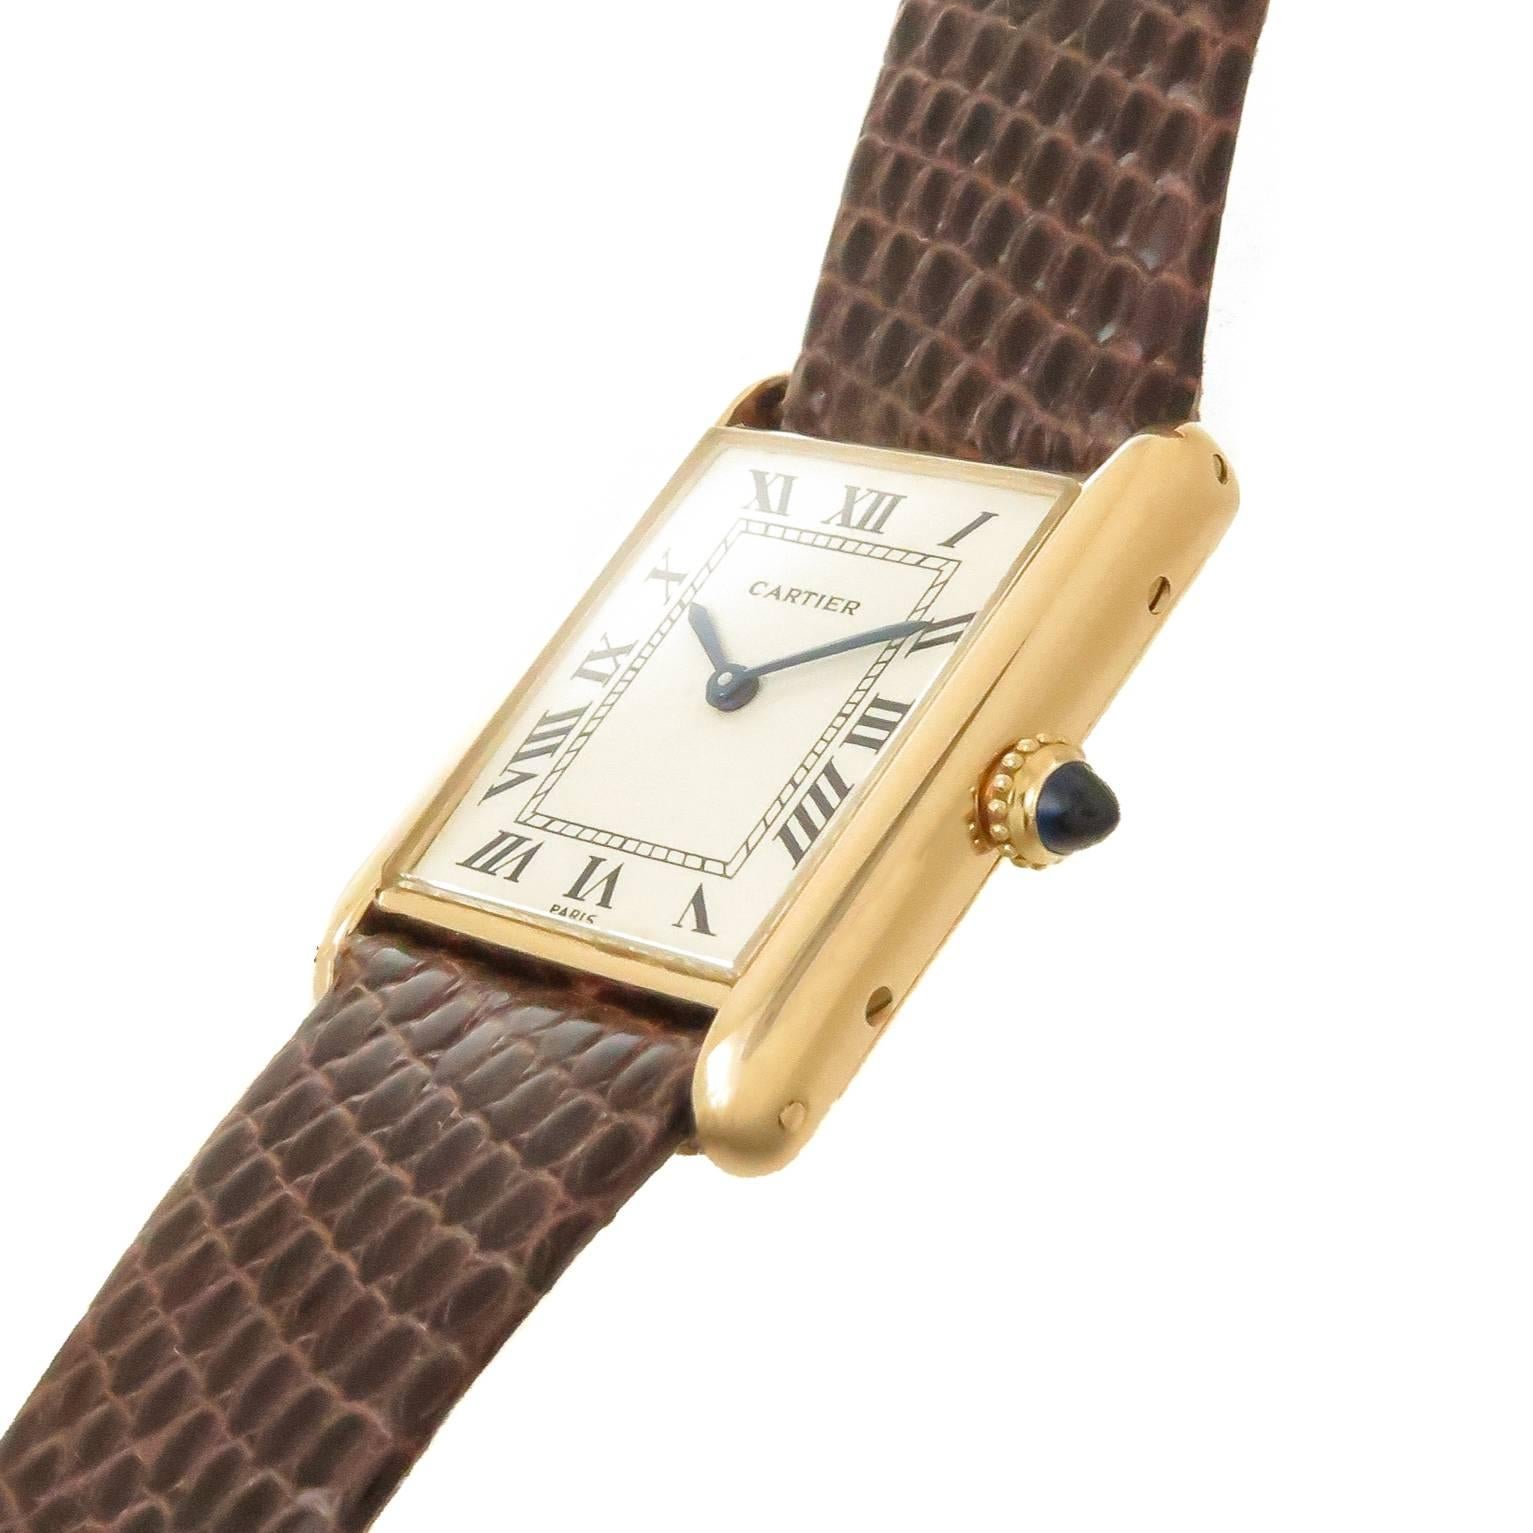 Circa 1980s Cartier Paris Tank Wrist watch, 30 X 23 MM 18K Yellow Gold Case, Mechanical, Manual wind 17 Jewel cartier Movement, White Dial with Black Roman Numerals, Sapphire Crown. New Brown Lizard Strap with Cartier Gold Plate Tang Buckle. Watch